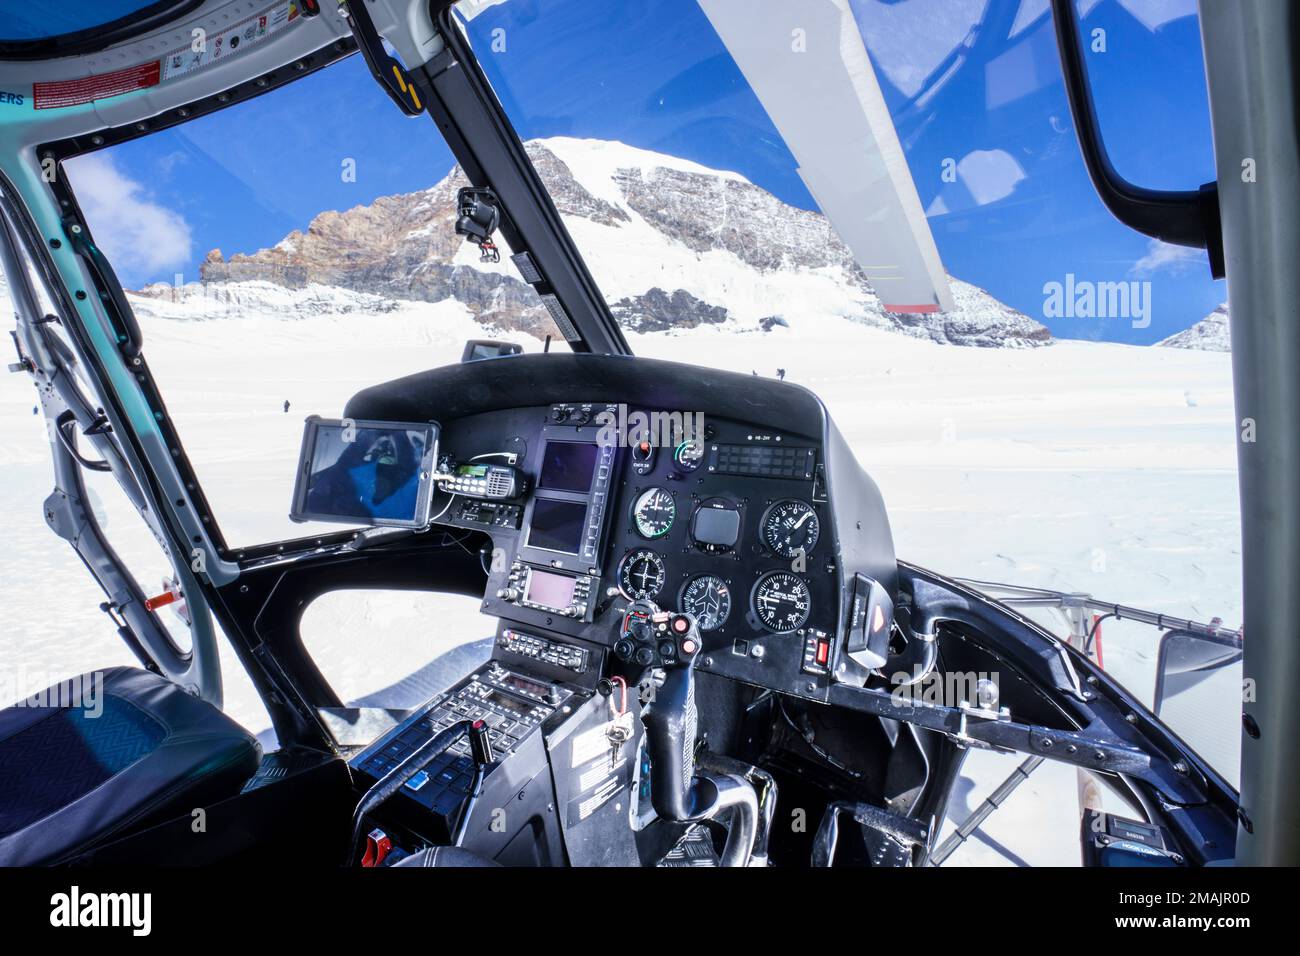 Helicopter cockpit inside, on ground snow. Close up of instruments, look out to snow covert mountains. Jungfrau Joch, Grindelwald Switzerland Stock Photo